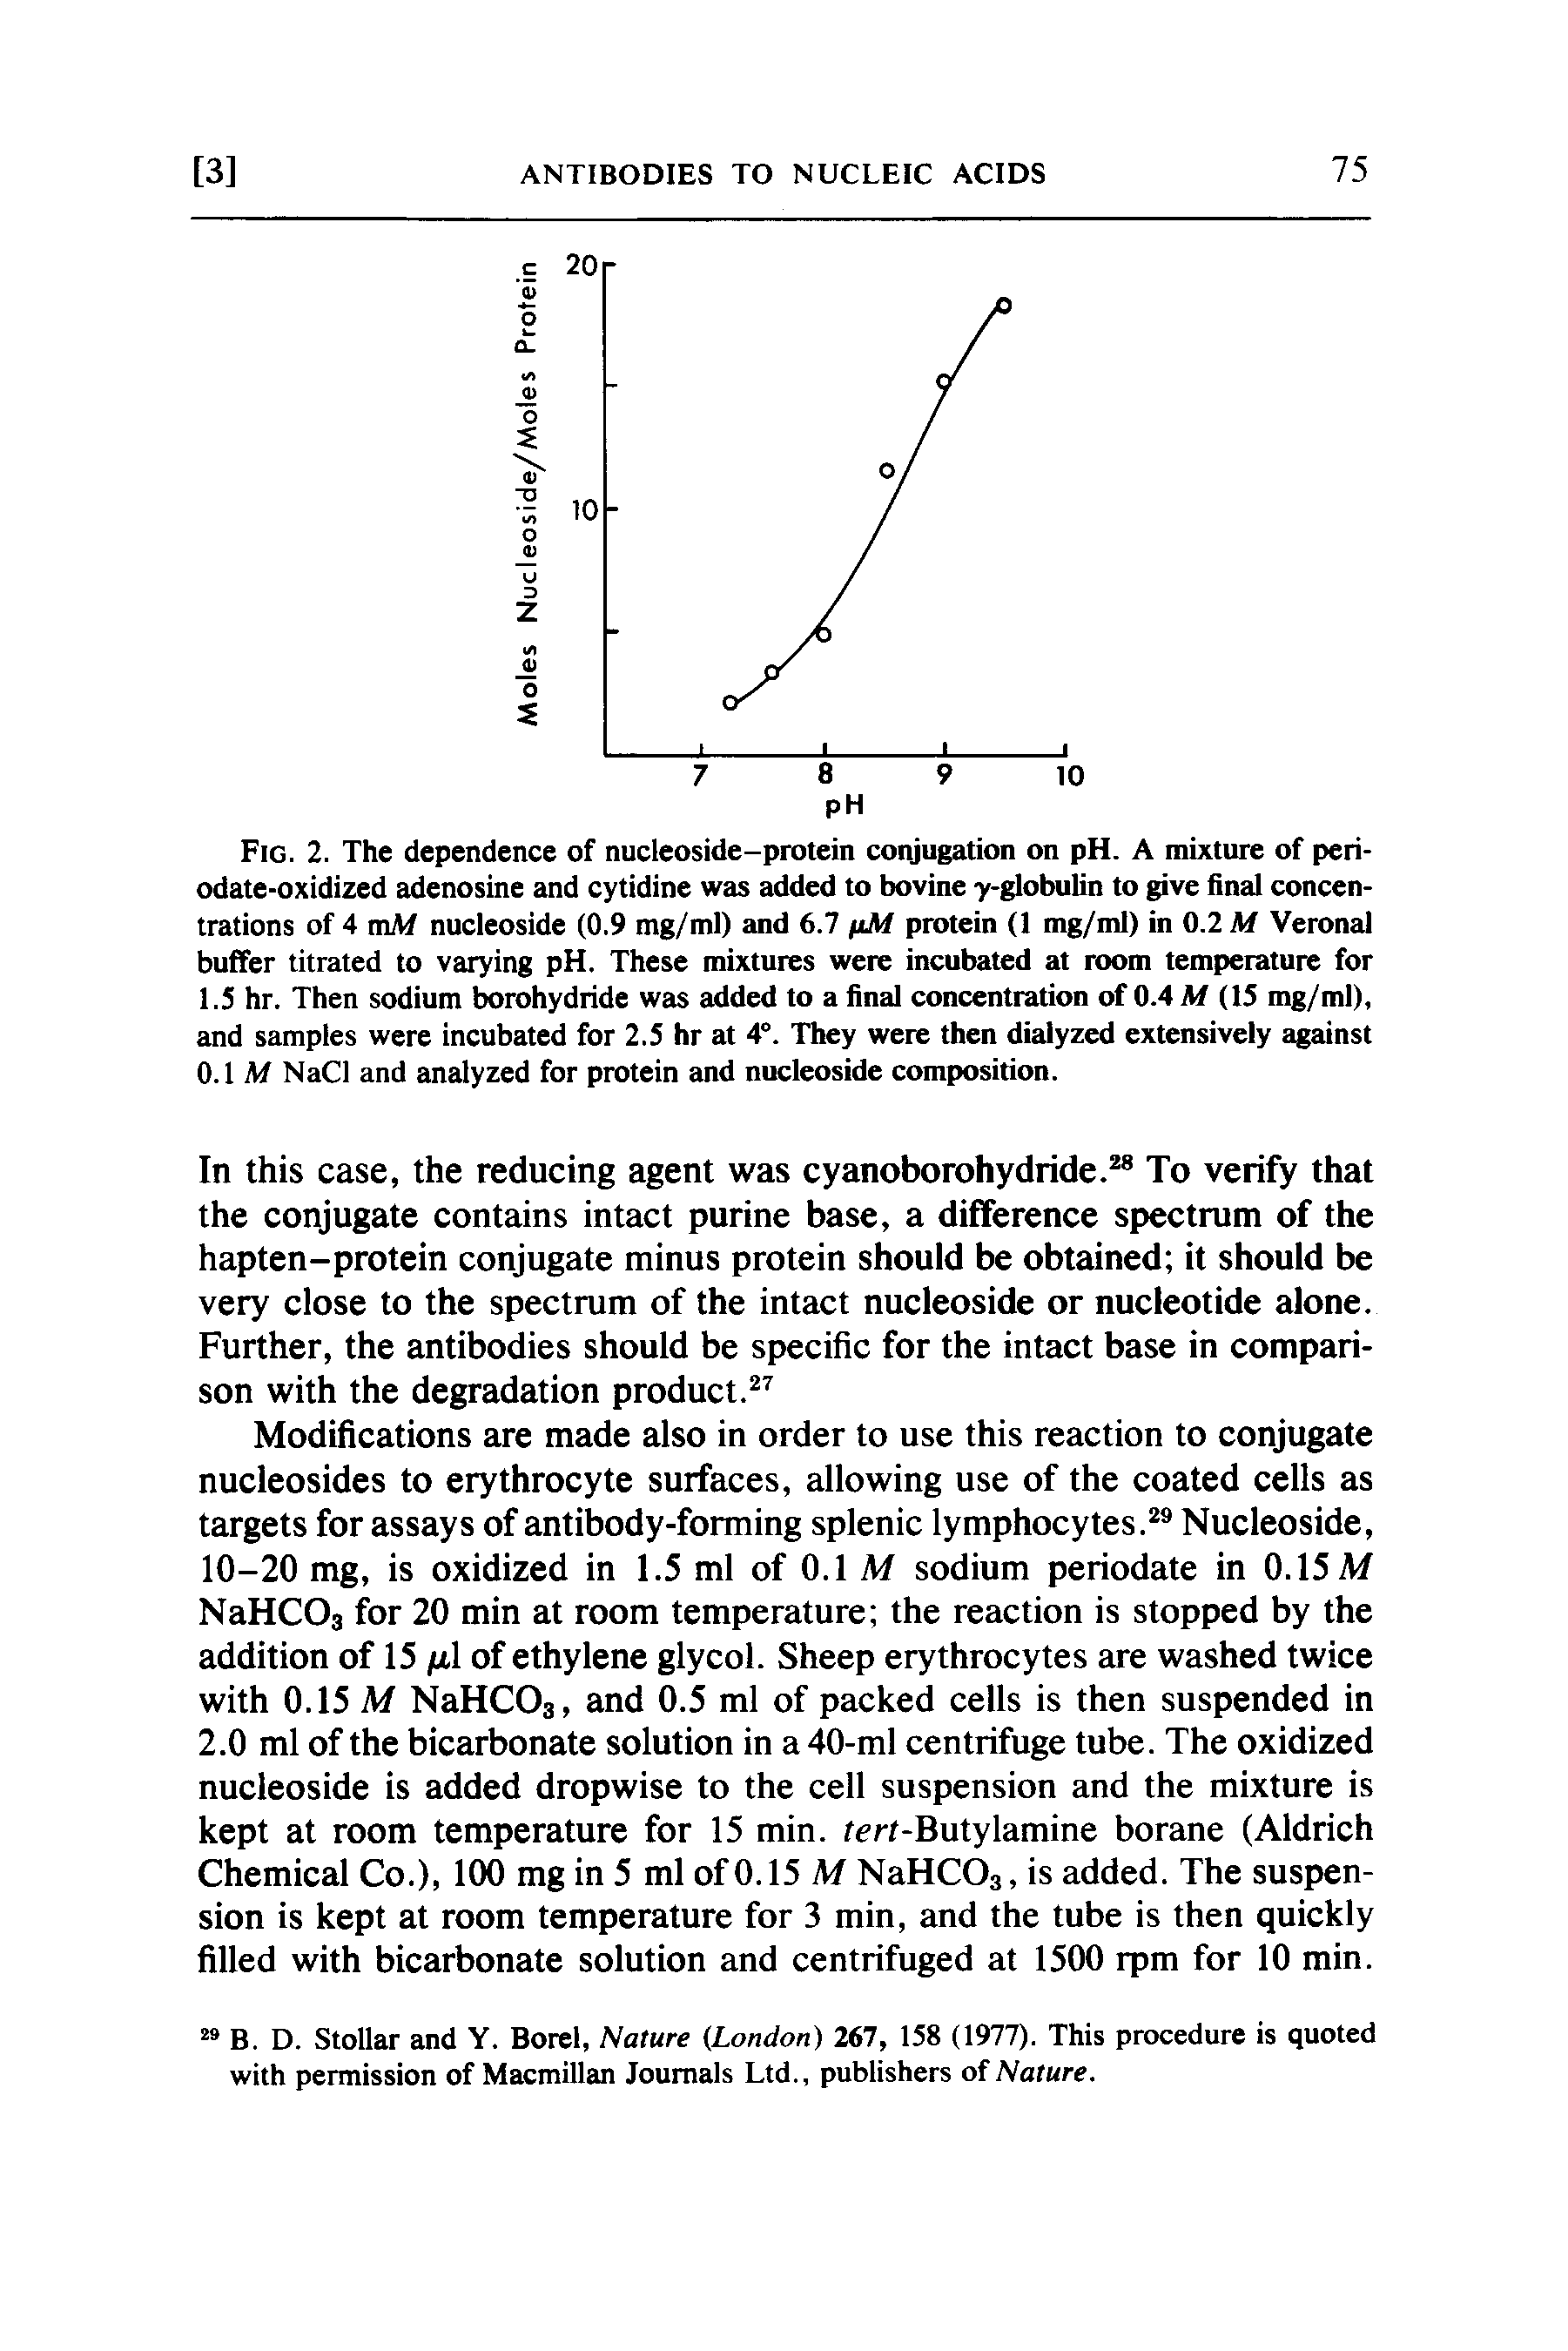 Fig. 2. The dependence of nucleoside-protein conjugation on pH. A mixture of periodate-oxidized adenosine and cytidine was added to bovine y-globulin to give final concentrations of 4 mM nucleoside (0.9 mg/ml) and 6.7 ftM protein (1 mg/ml) in 0.2 M Veronal buffer titrated to varying pH. These mixtures were incubated at room temperature for 1.5 hr. Then sodium borohydride was added to a final concentration of 0.4 M (15 mg/ml), and samples were incubated for 2.5 hr at 4°. They were then dialyzed extensively against 0.1 M NaCl and analyzed for protein and nucleoside composition.